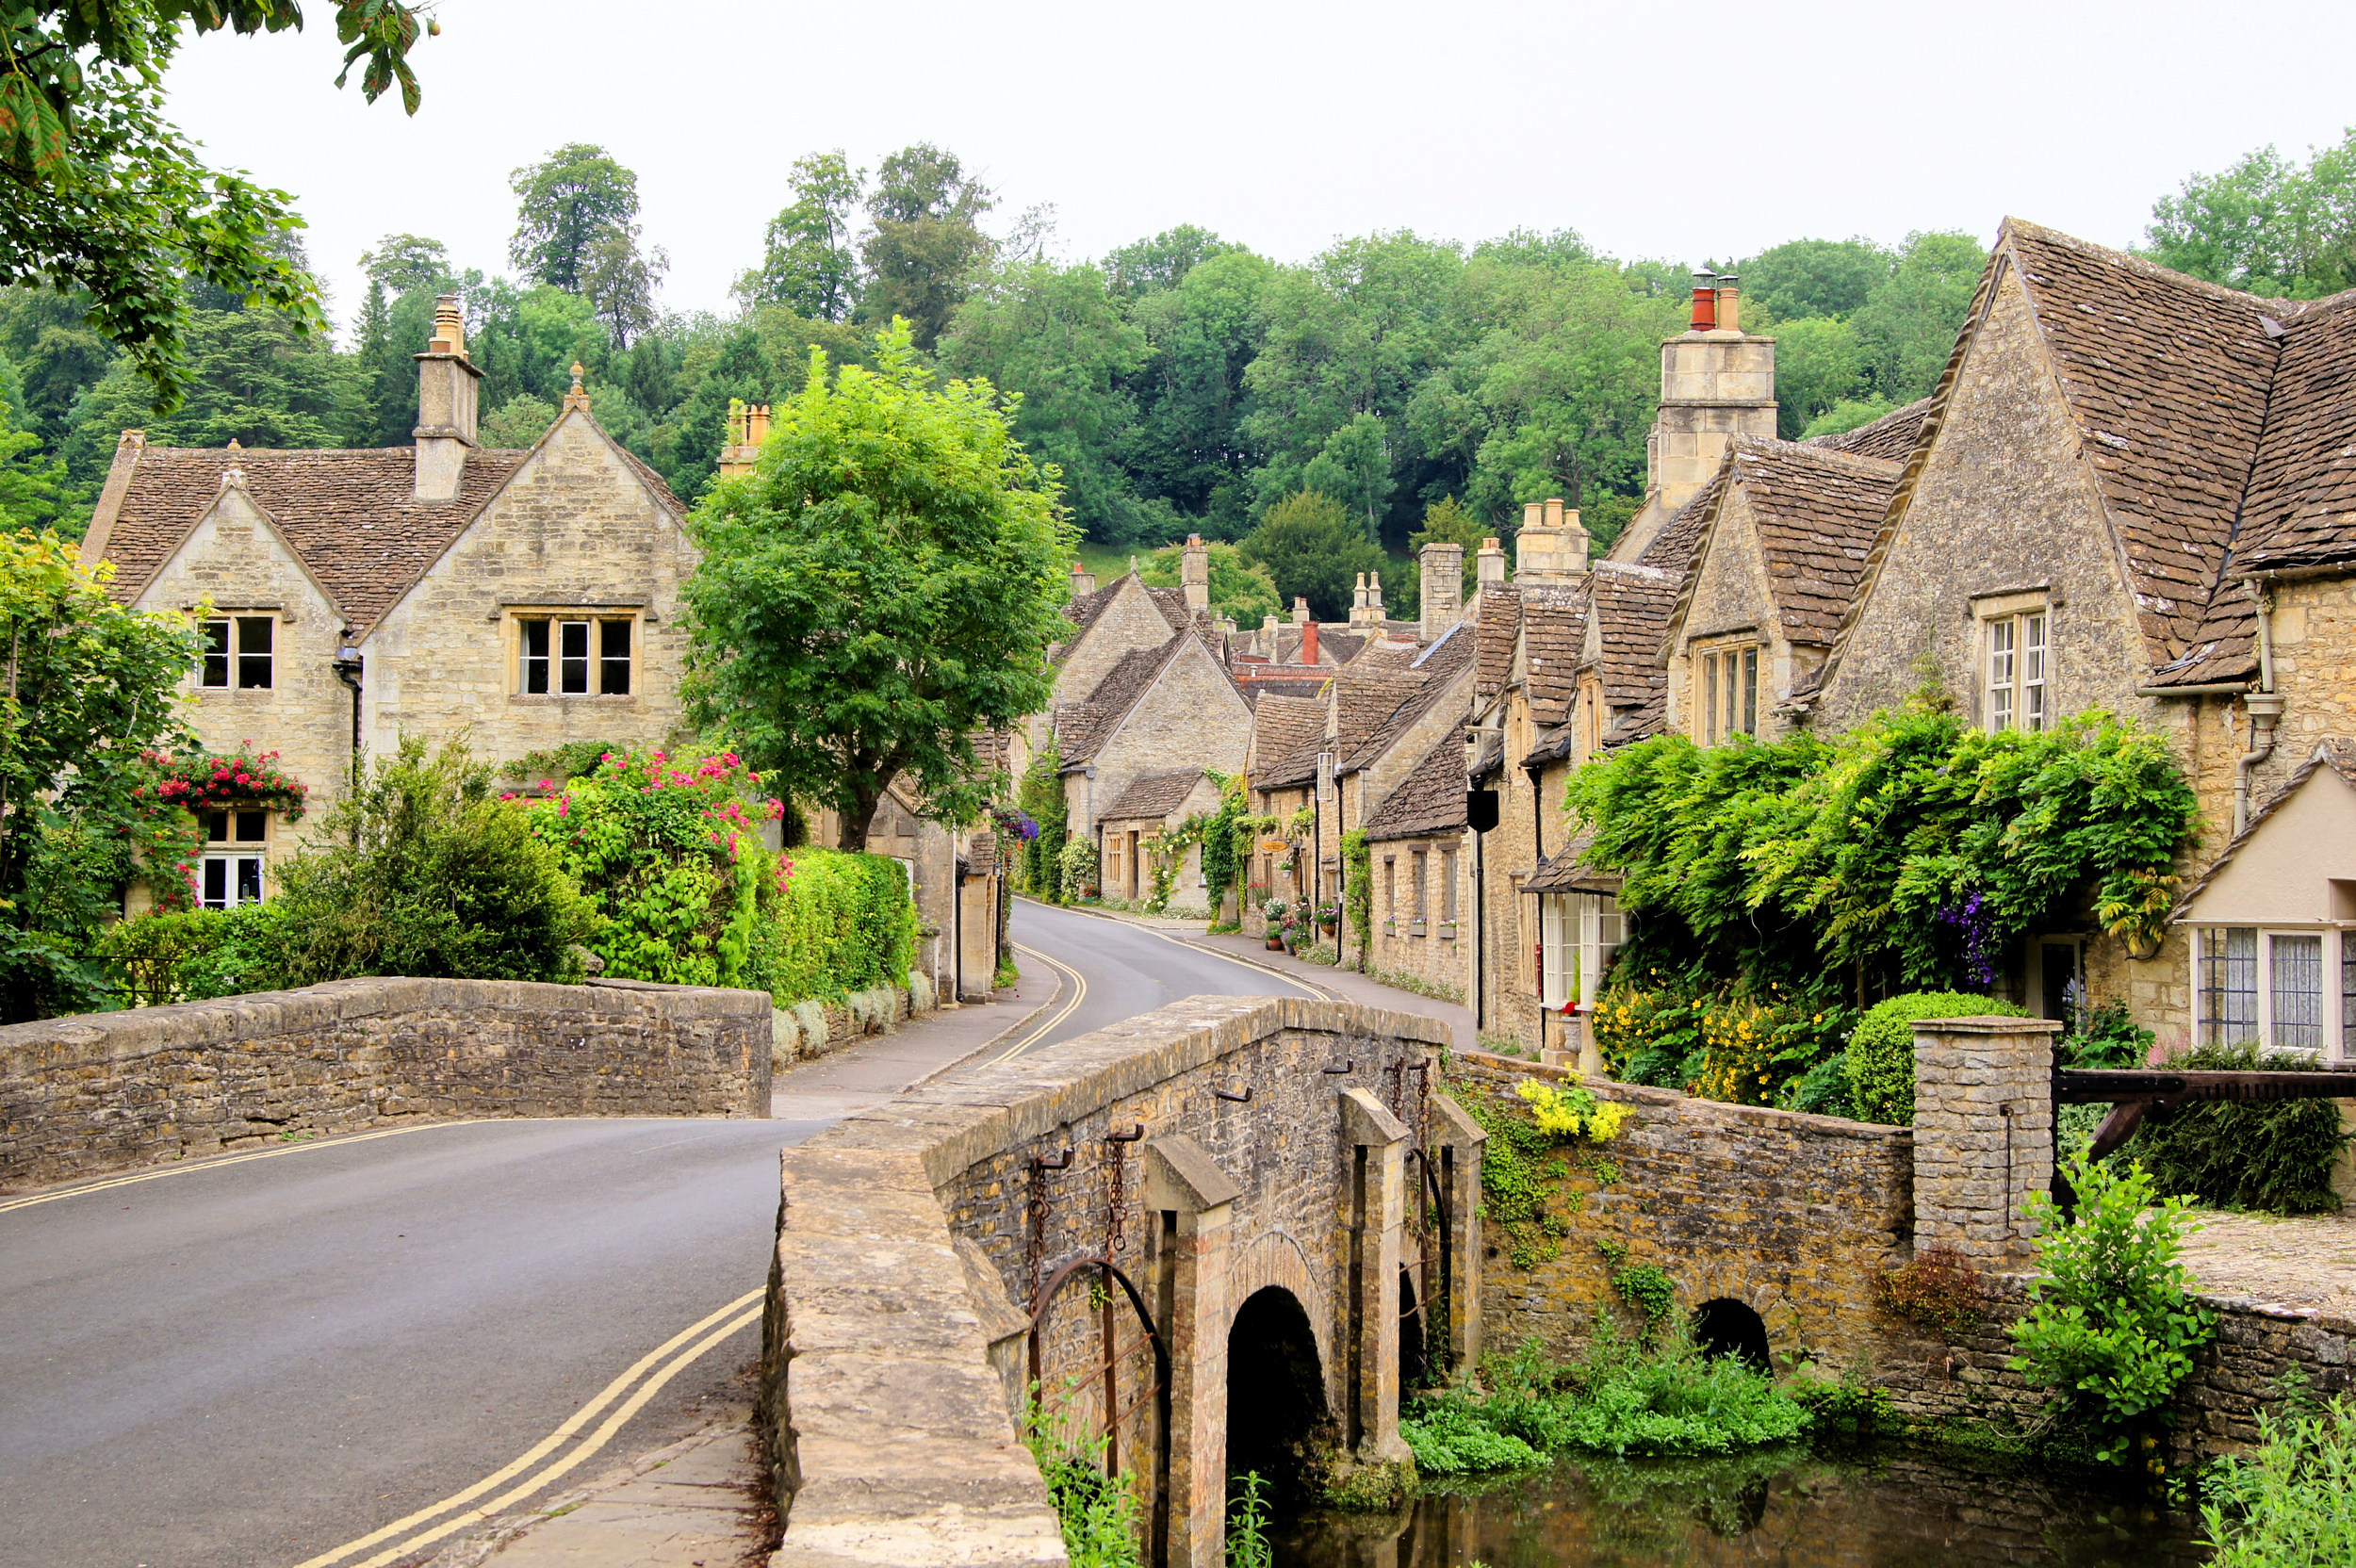 <p>This storybook part of the United Kingdom is full of adorable thatched cottages, scenic walking routes, and villages plucked from a Miss Marple episode. The towns are best explored with a car but can also be walked between if you’re keen on some hiking!</p><p>You may also like: <a href='https://www.yardbarker.com/lifestyle/articles/13_foods_drinks_that_cause_bad_breath_and_13_that_combat_it_022524/s1__36110171'>13 foods & drinks that cause bad breath and 13 that combat it</a></p>